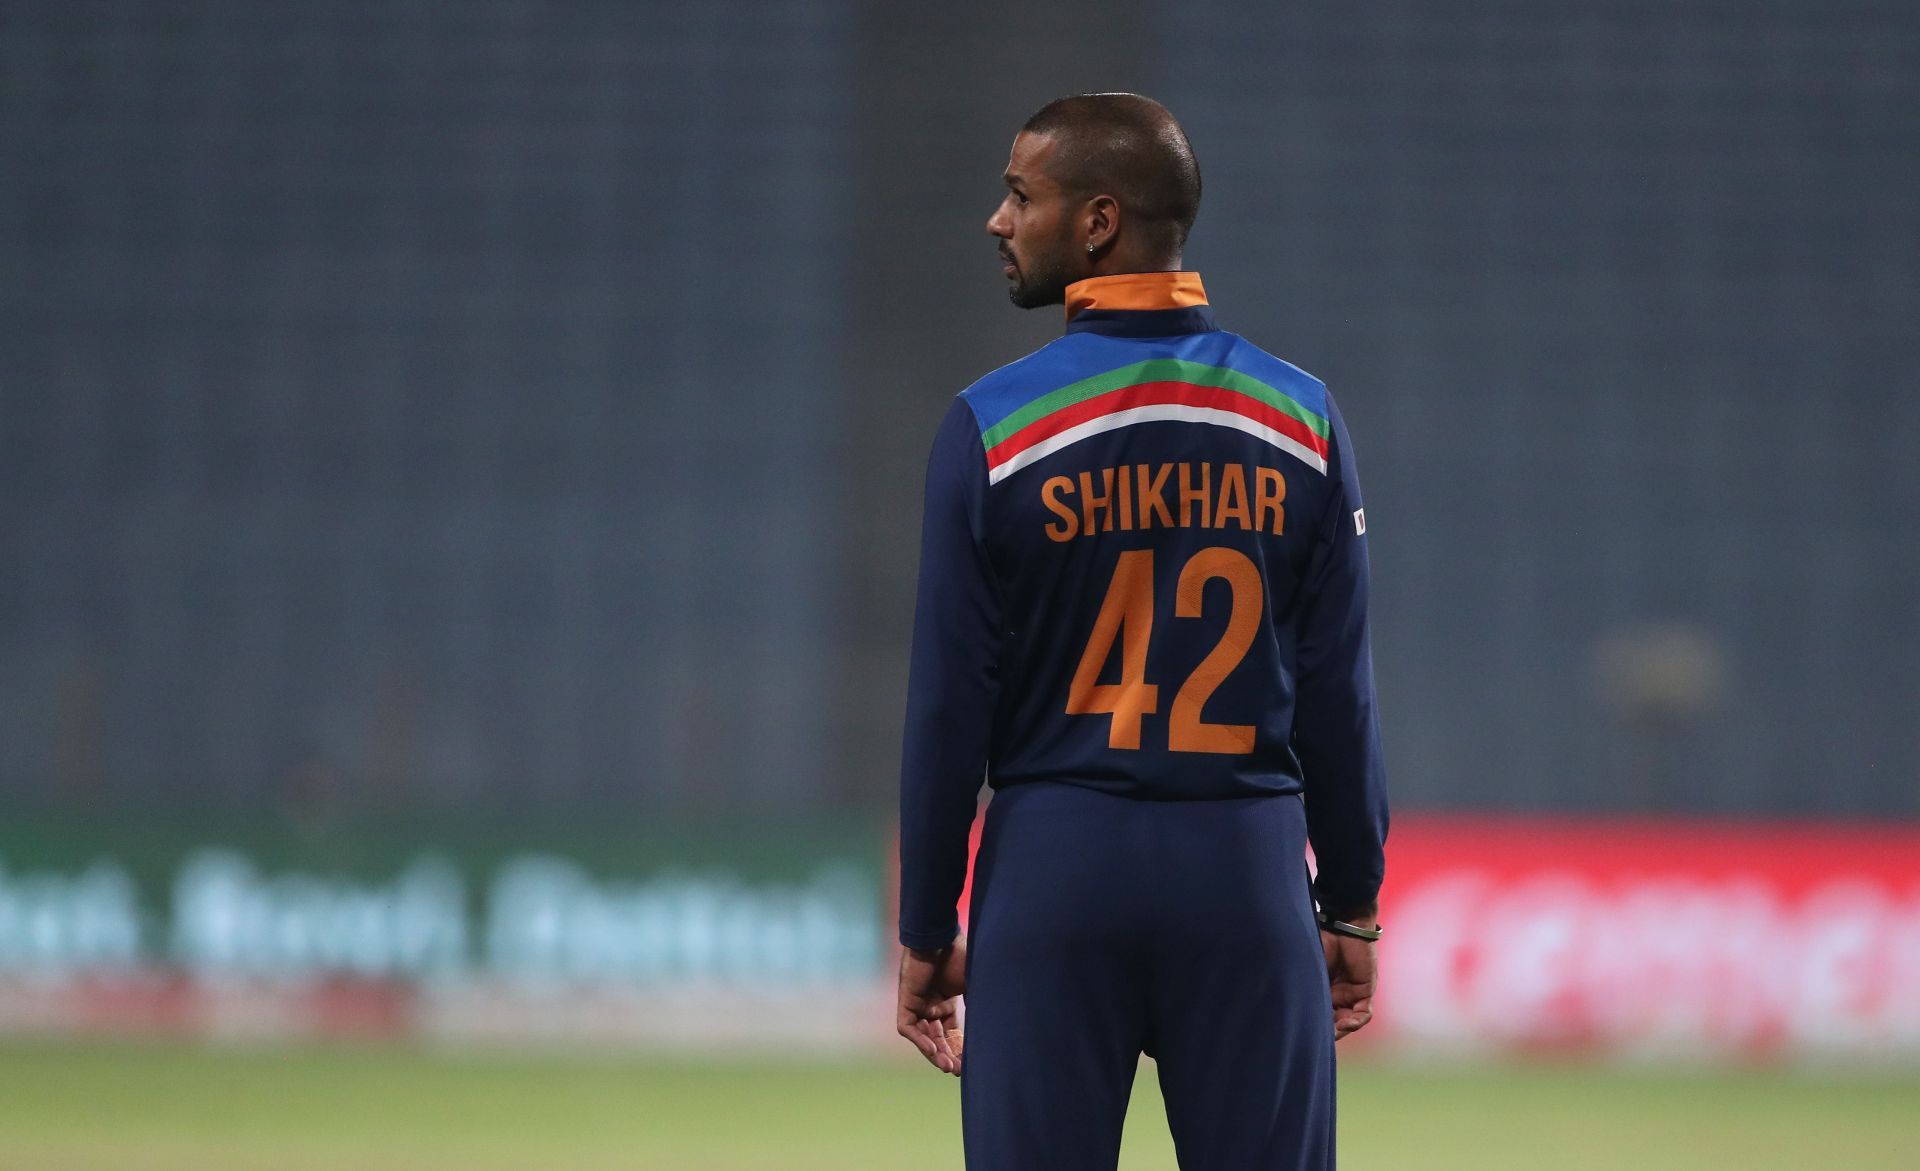 Shikhar Dhawan could prove to be a smart signing for RCB